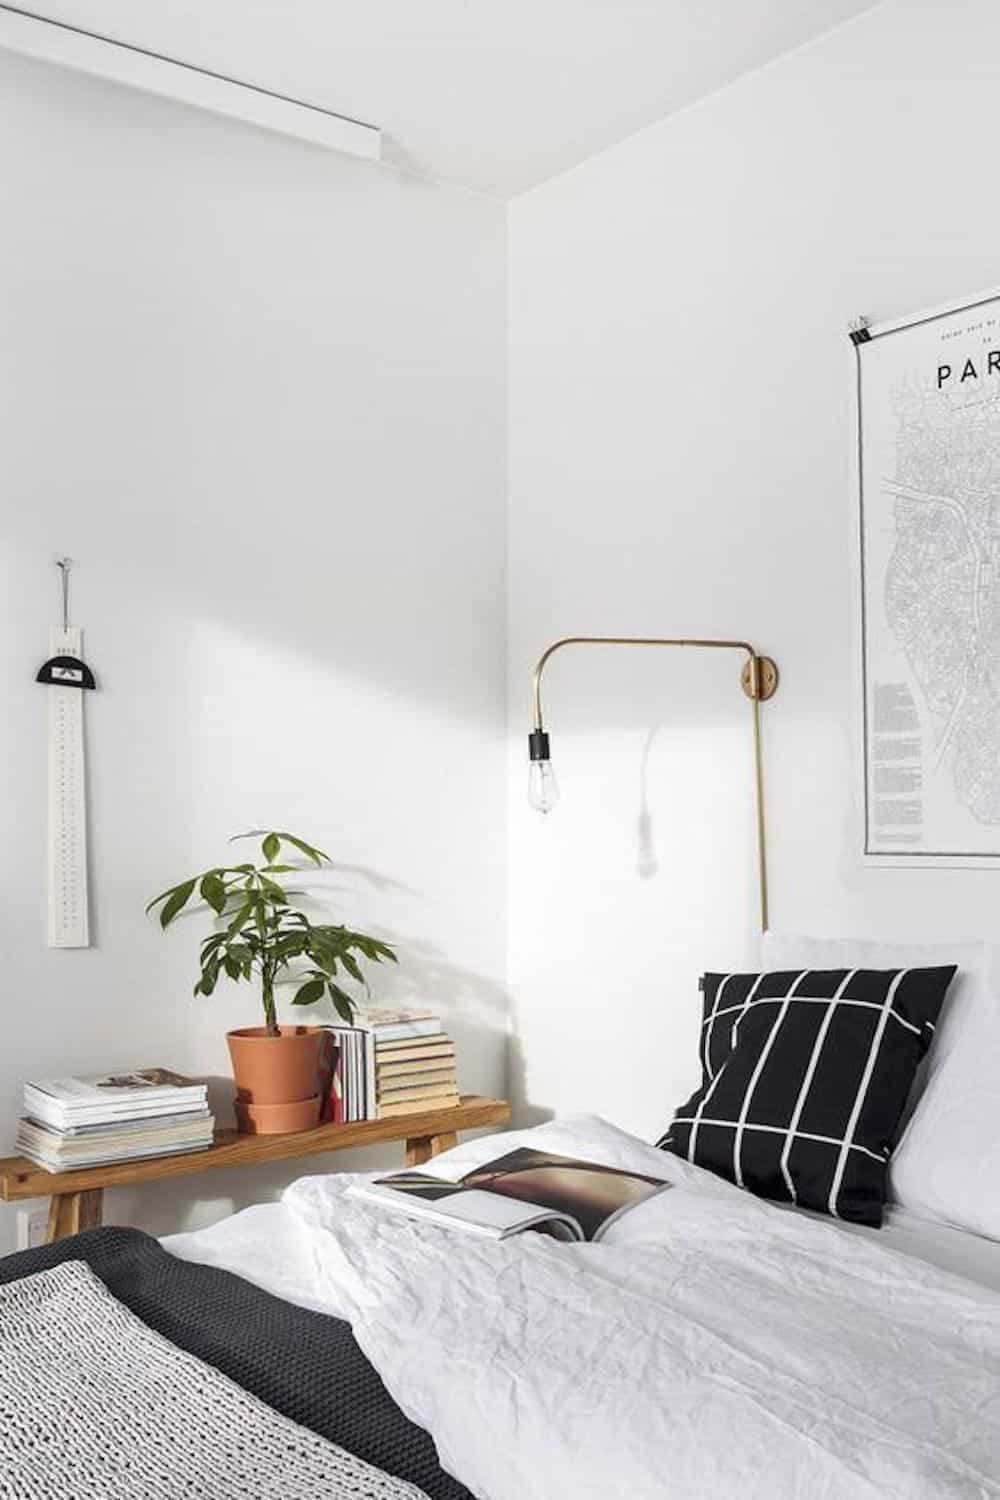 image of a white clean bedroom with minimalist decor and a plant